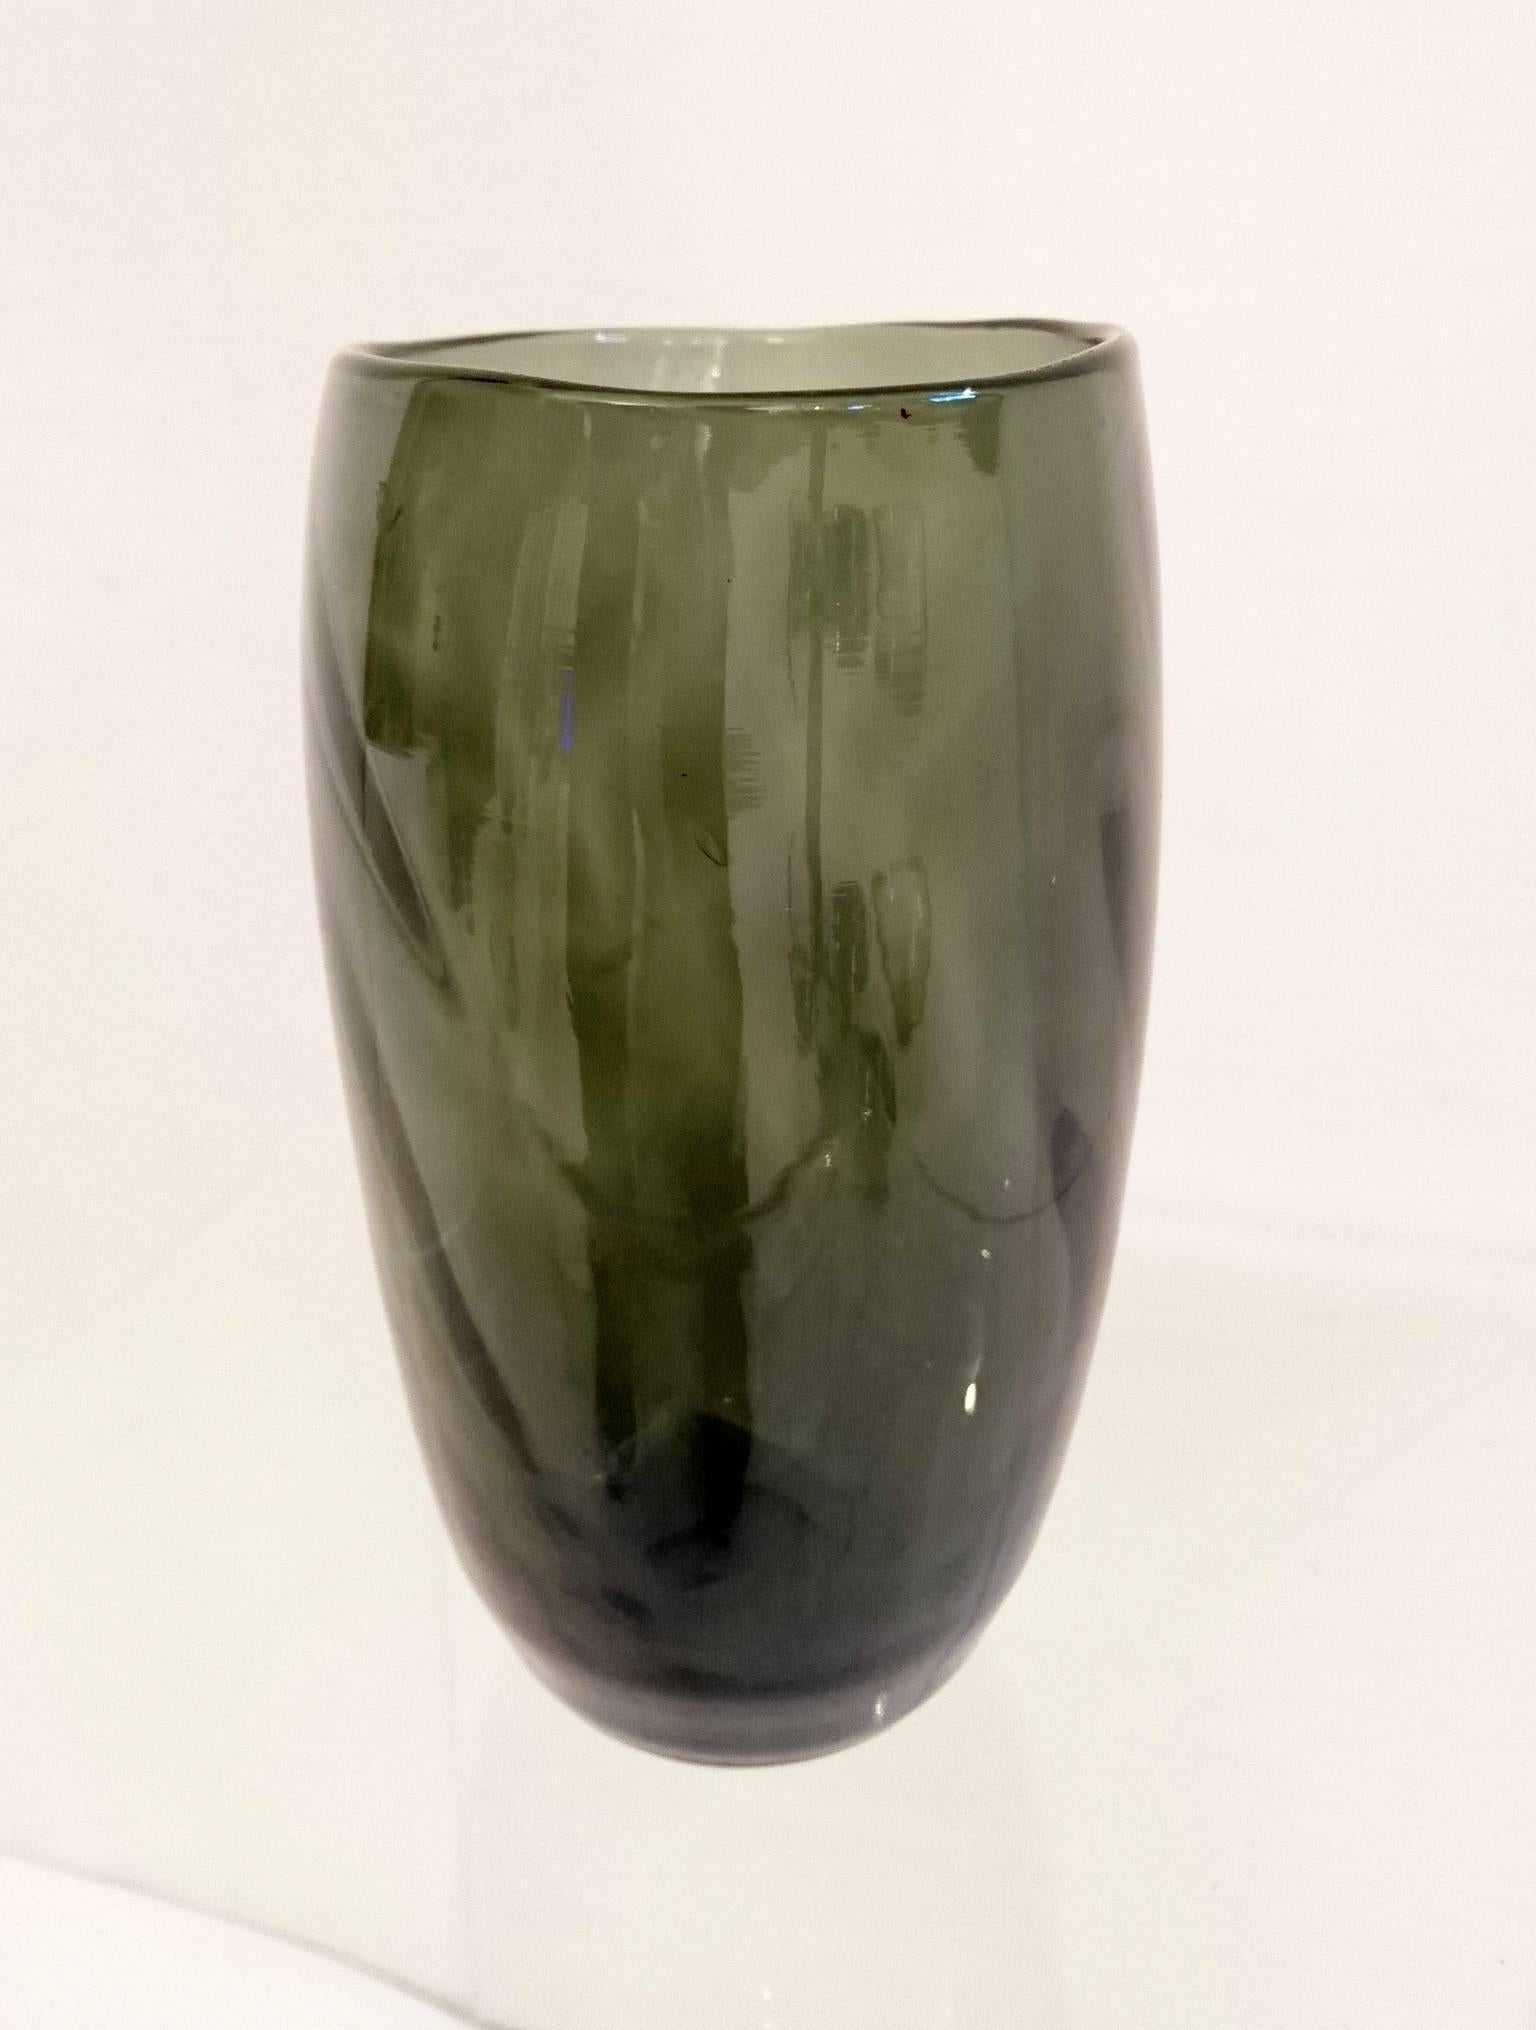 Dark gray cone shaped glass vase. The design is made in the shape of a swirl. No marks underneath but you can see the mark from being hand blown.